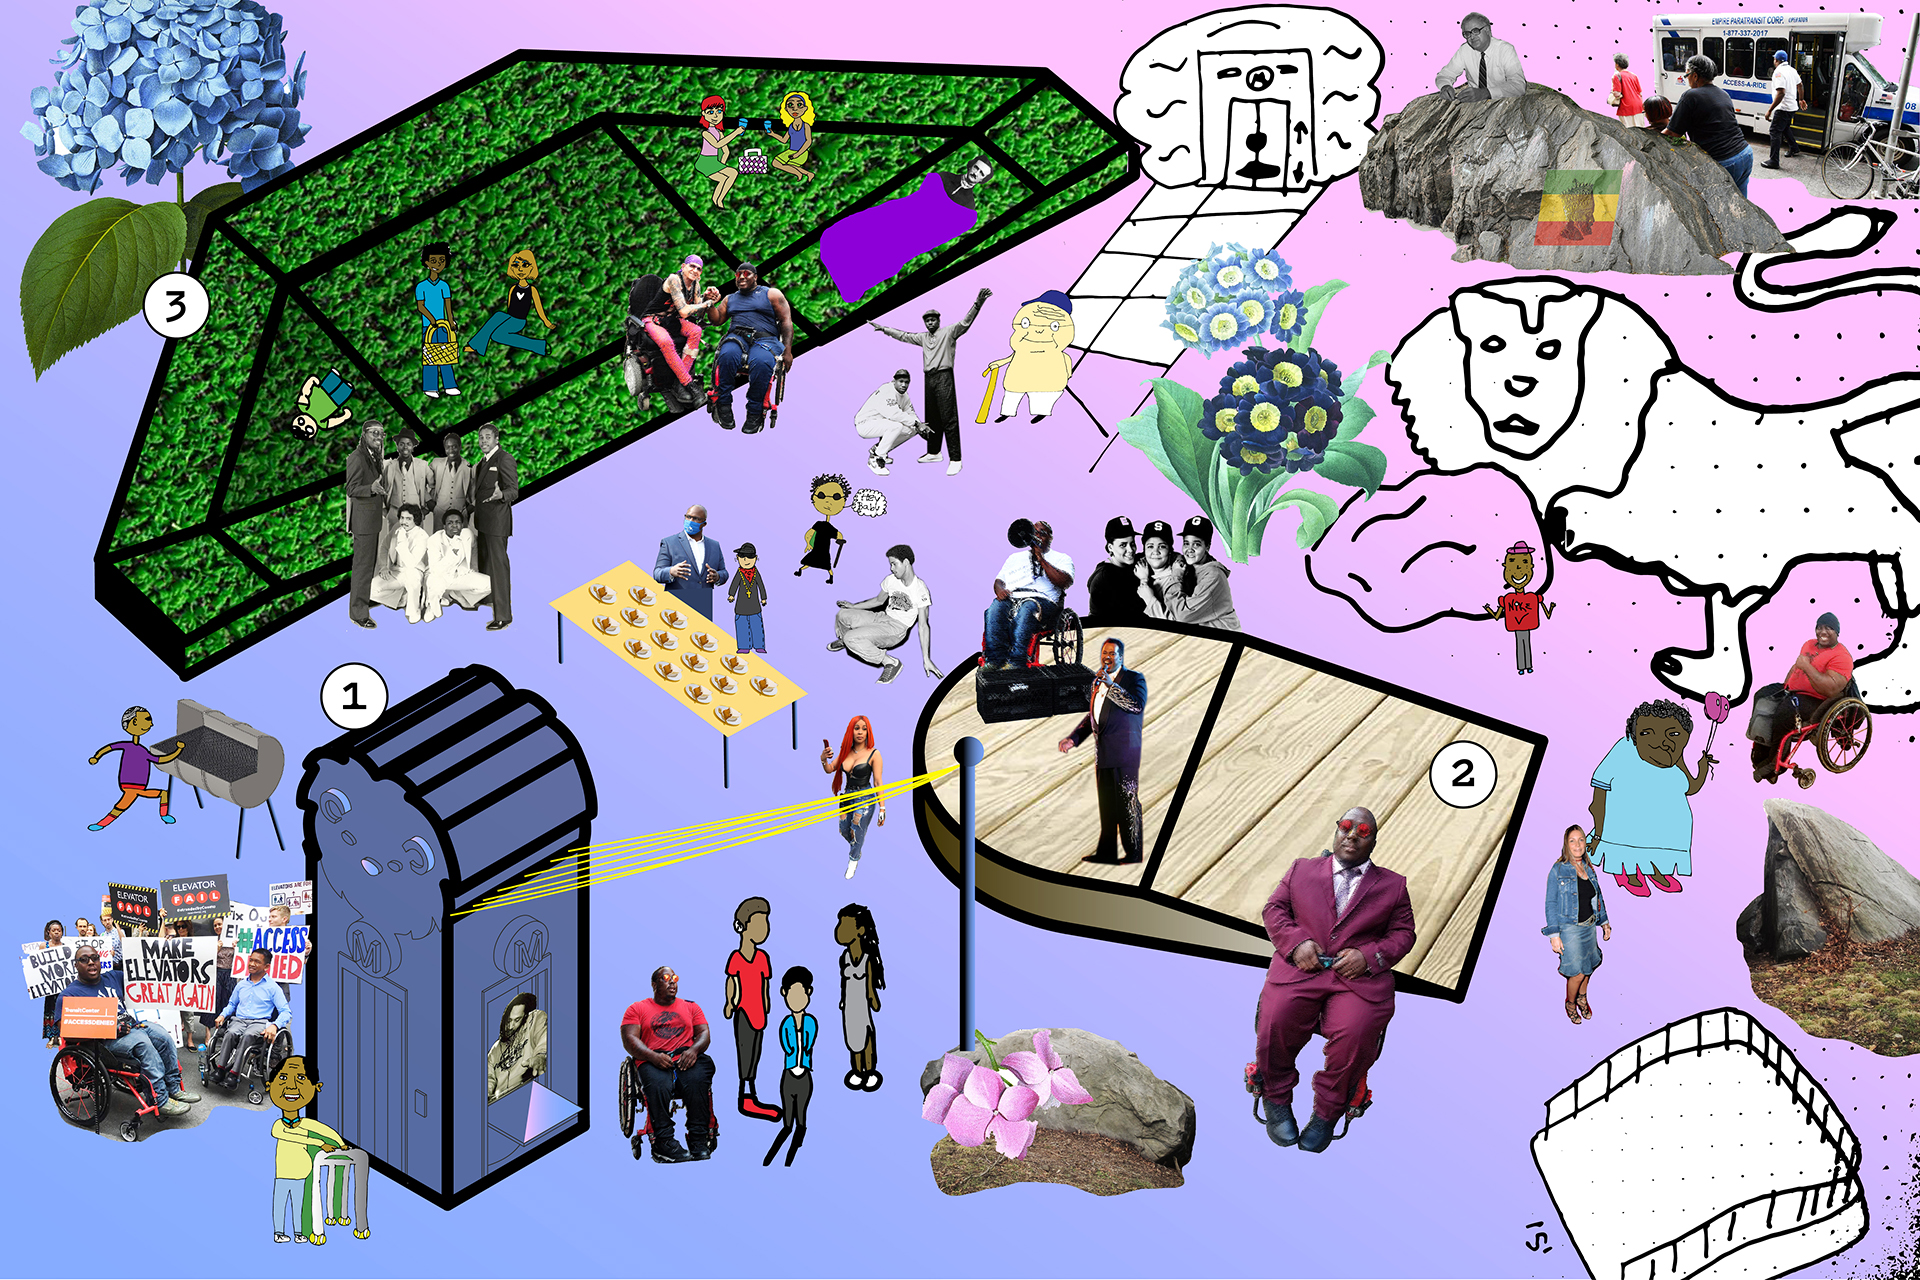 digital sketch of public spaces and people against a pink and purple background